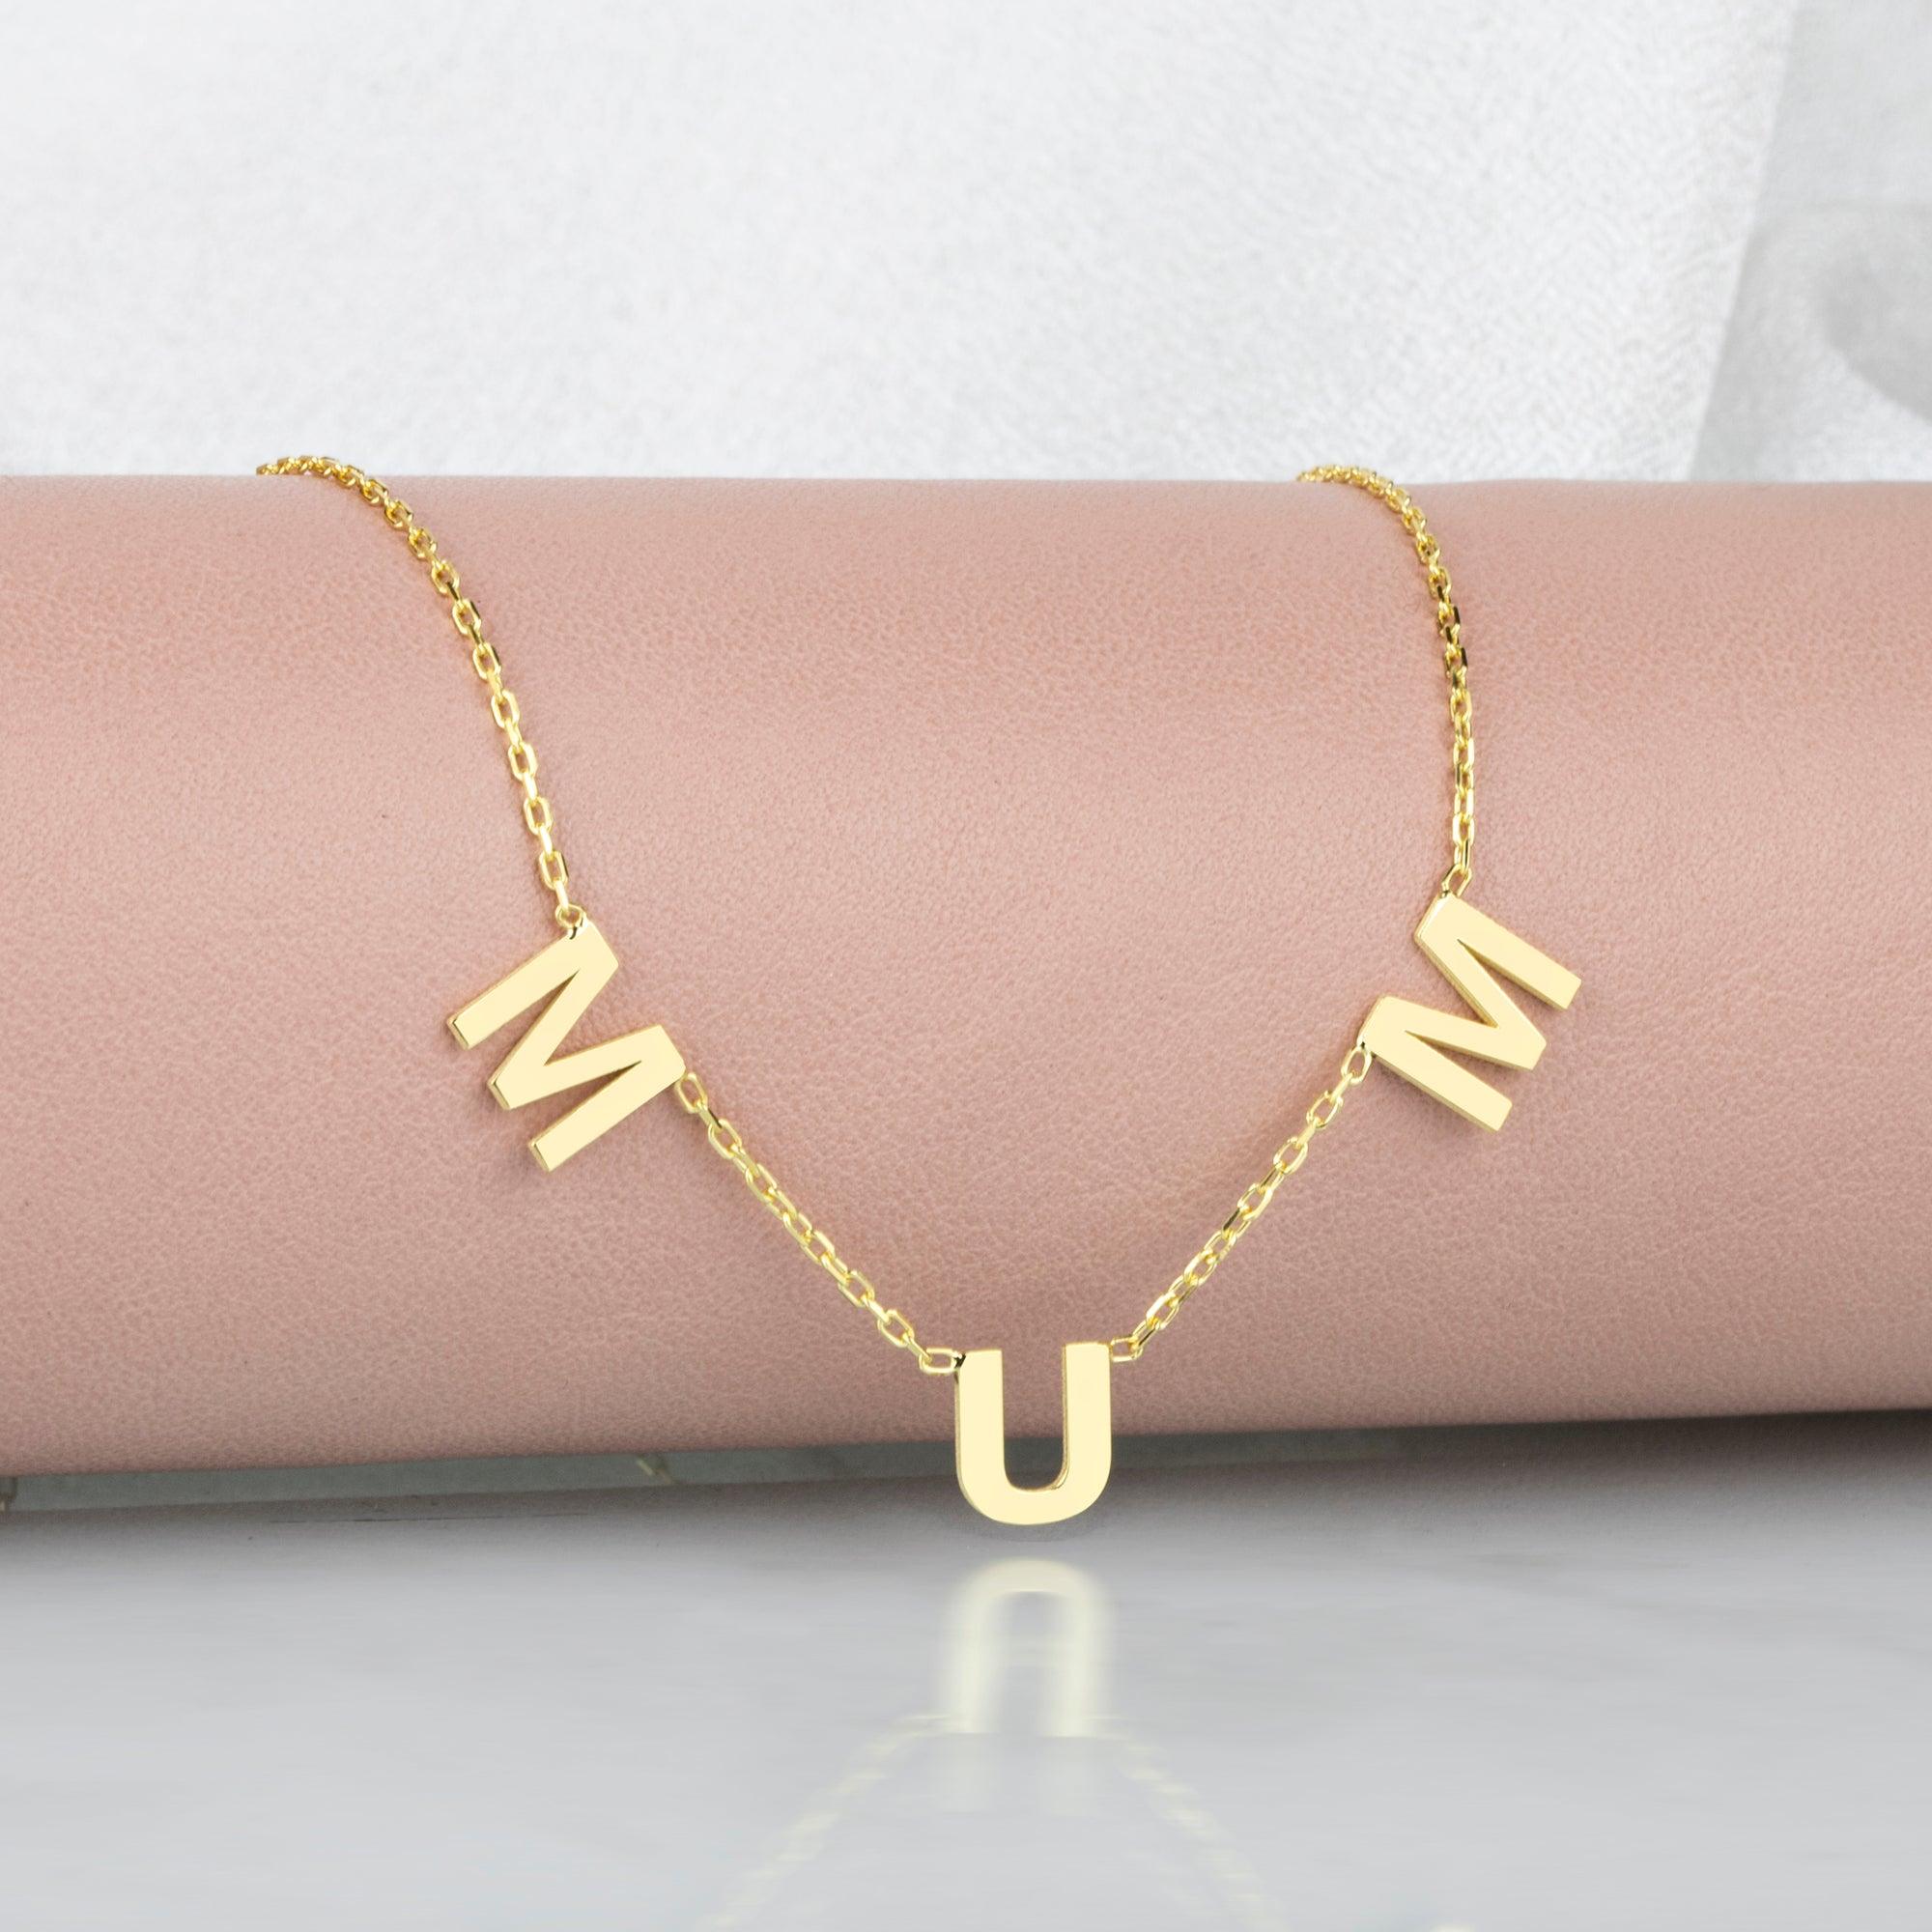 The best mum necklaces that you will want to wear forever